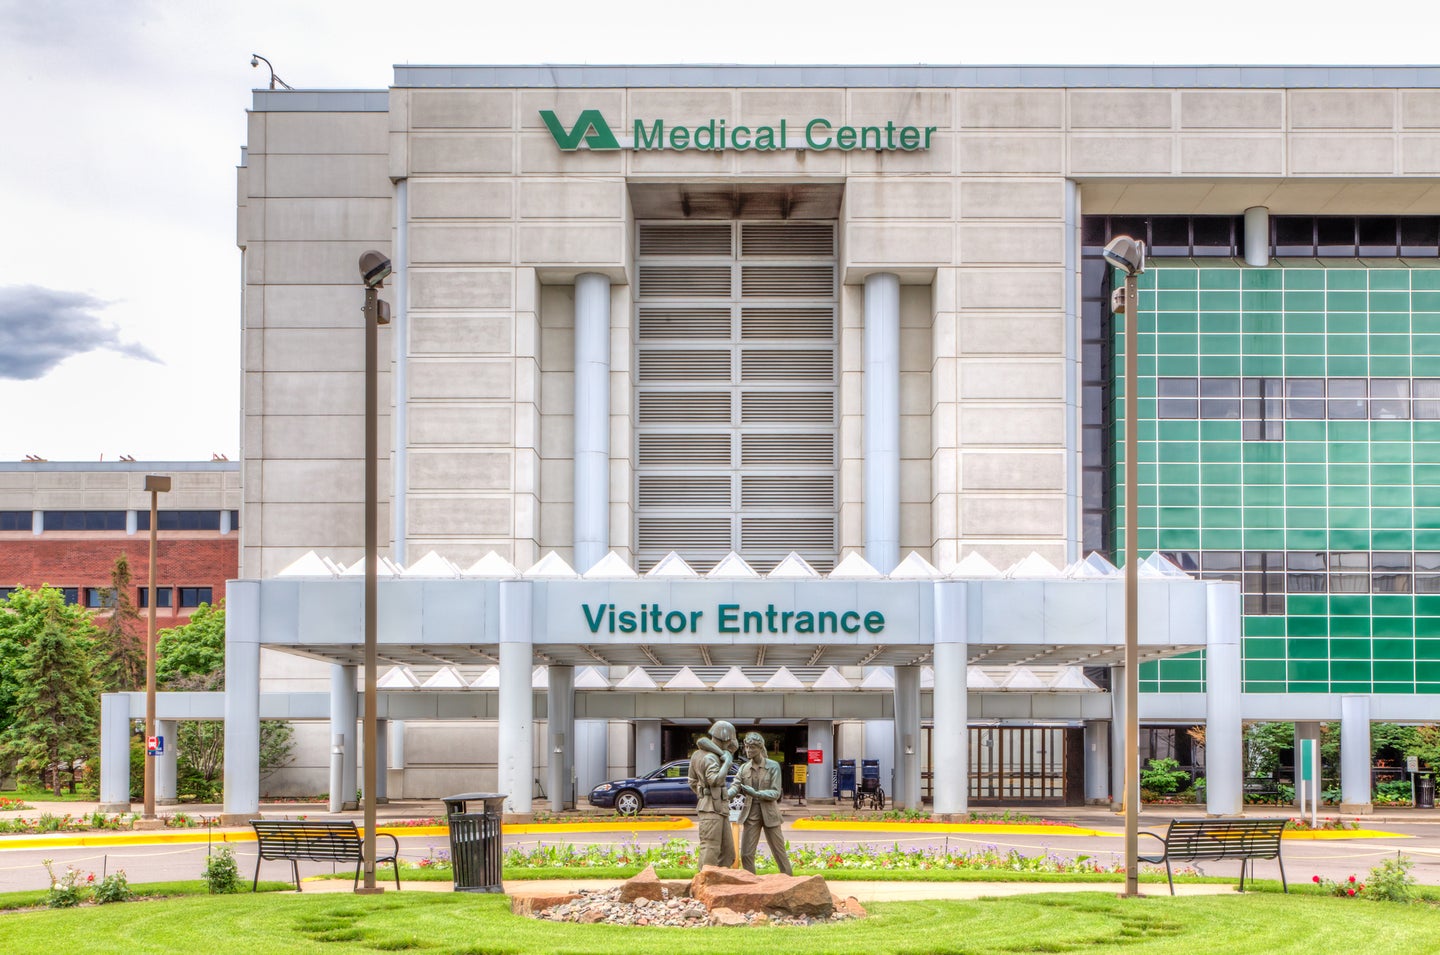 The visitor entrance of the Minneapolis VA Medical Center